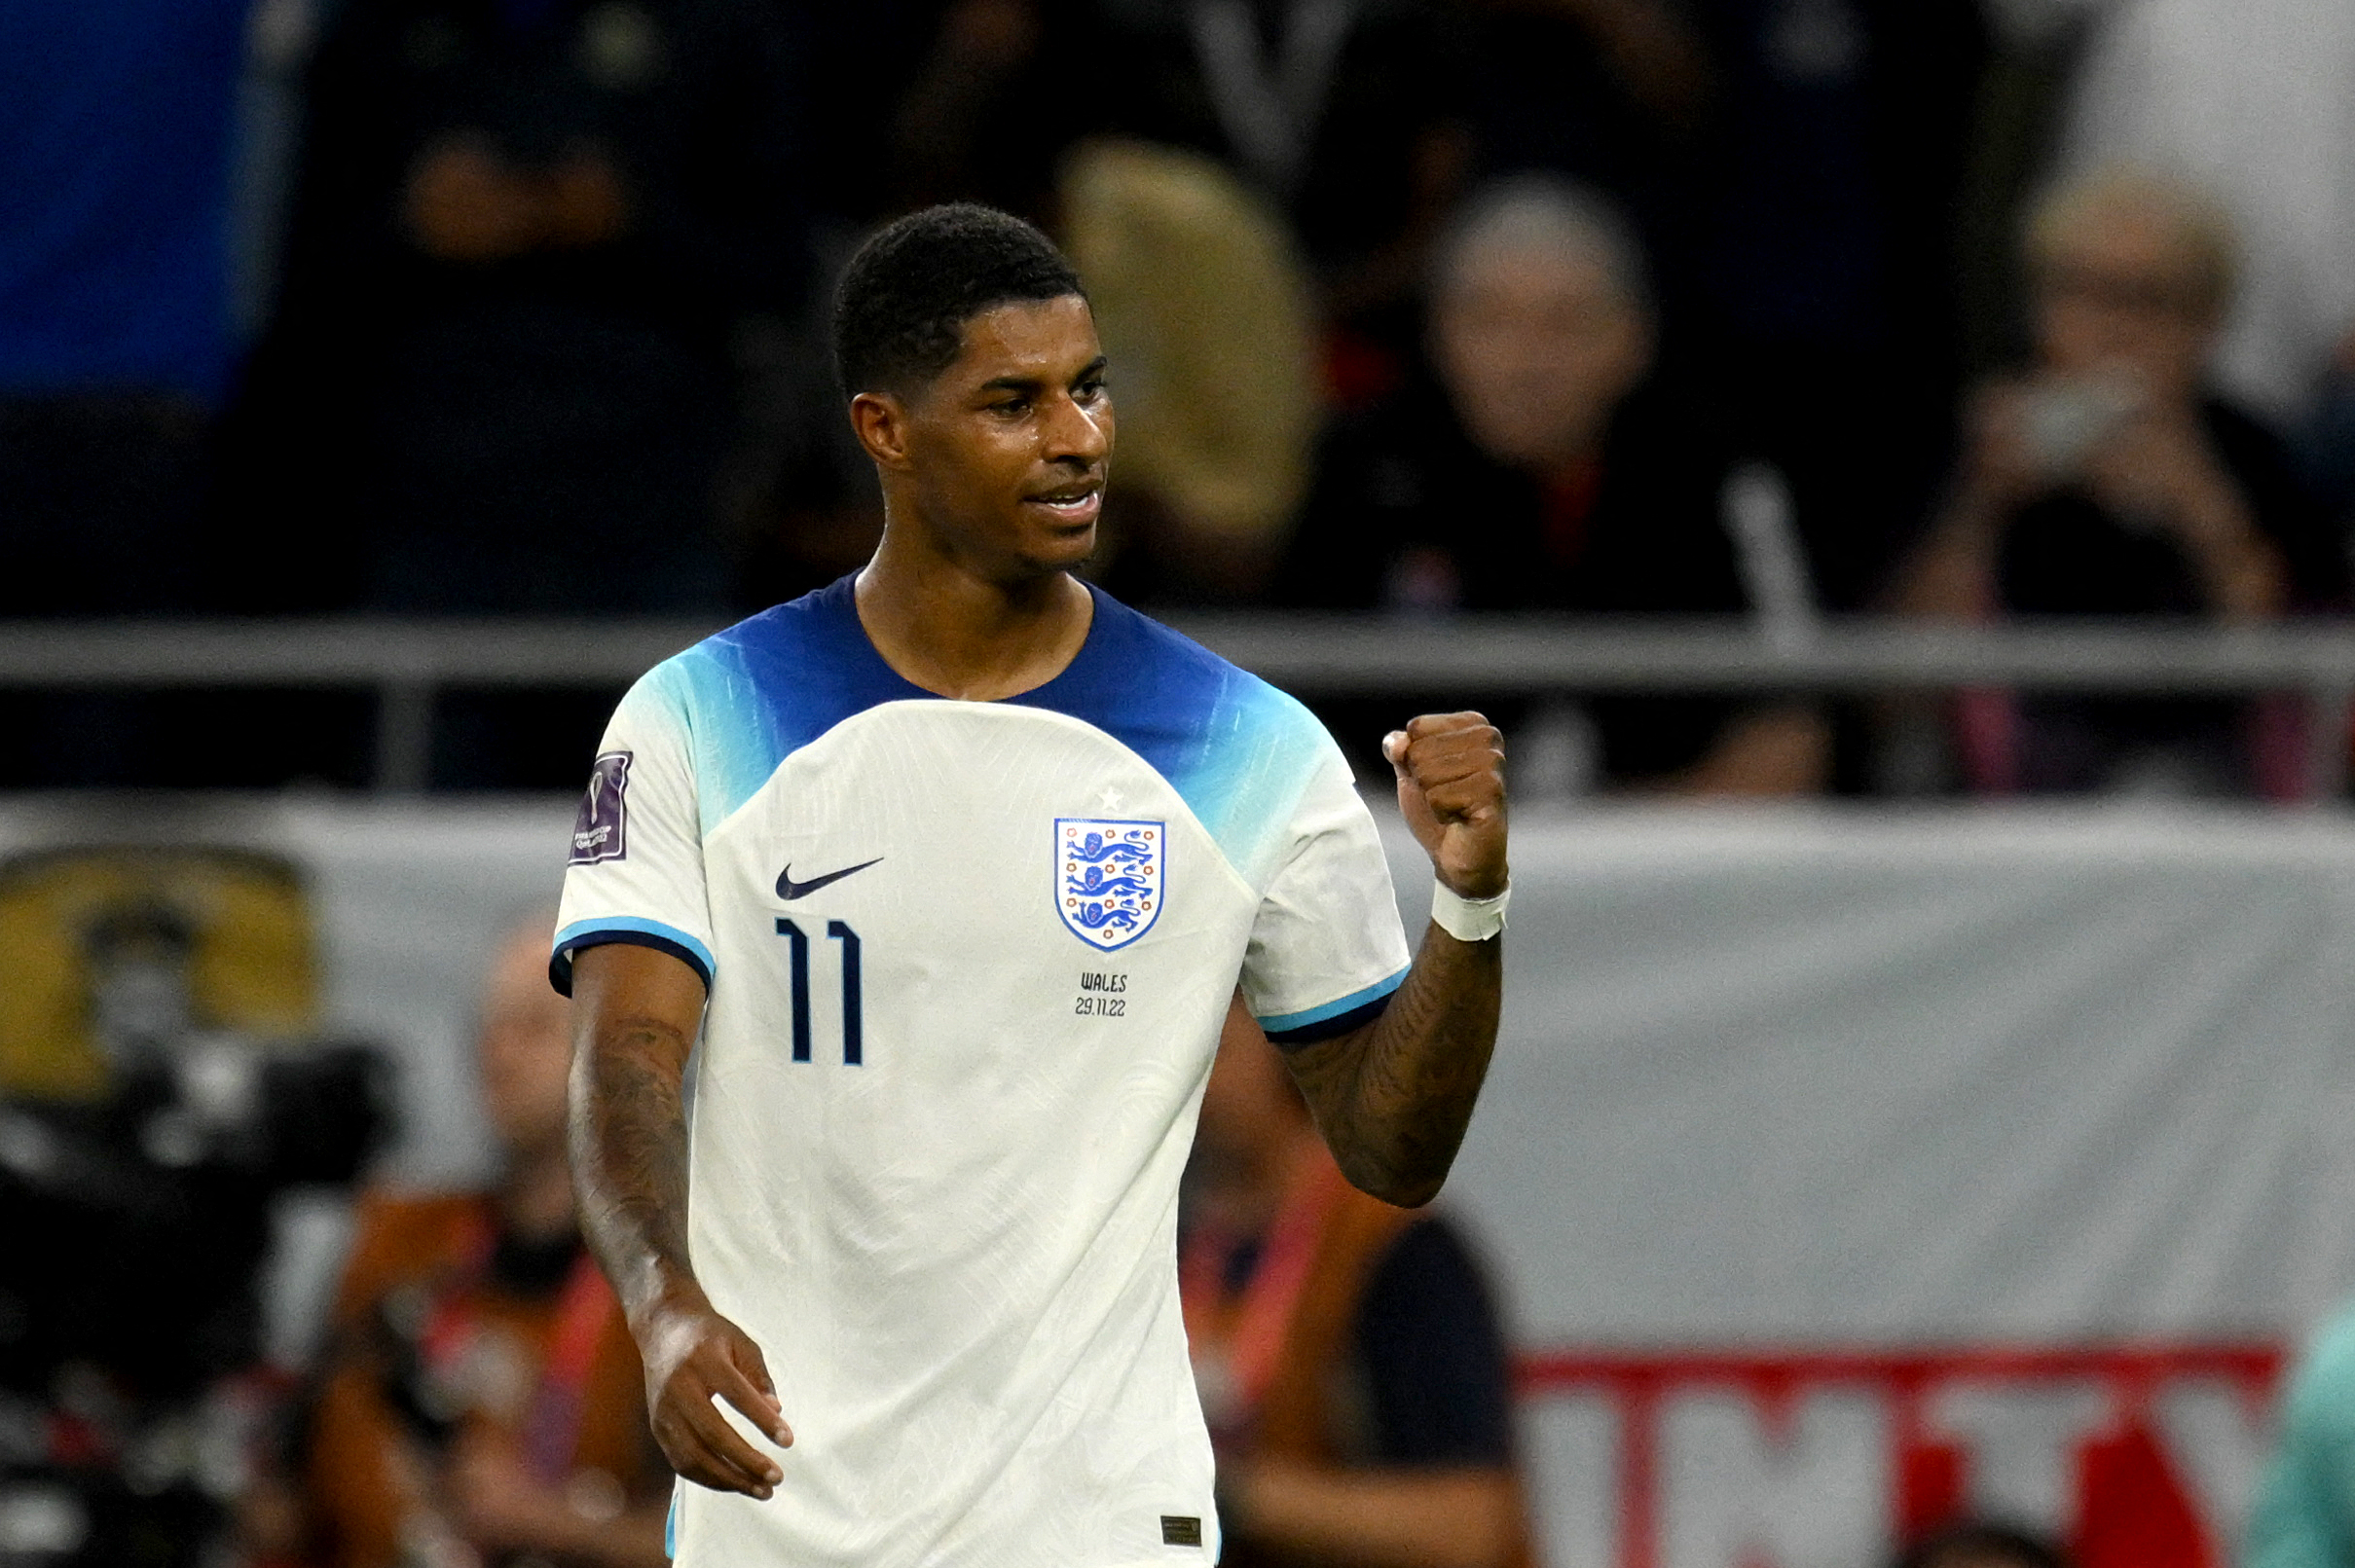 England's forward #11 Marcus Rashford celebrates after scoring his team's third goal during the Qatar 2022 World Cup Group B football match between Wales and England at the Ahmad Bin Ali Stadium in Al-Rayyan, west of Doha on November 29, 2022.